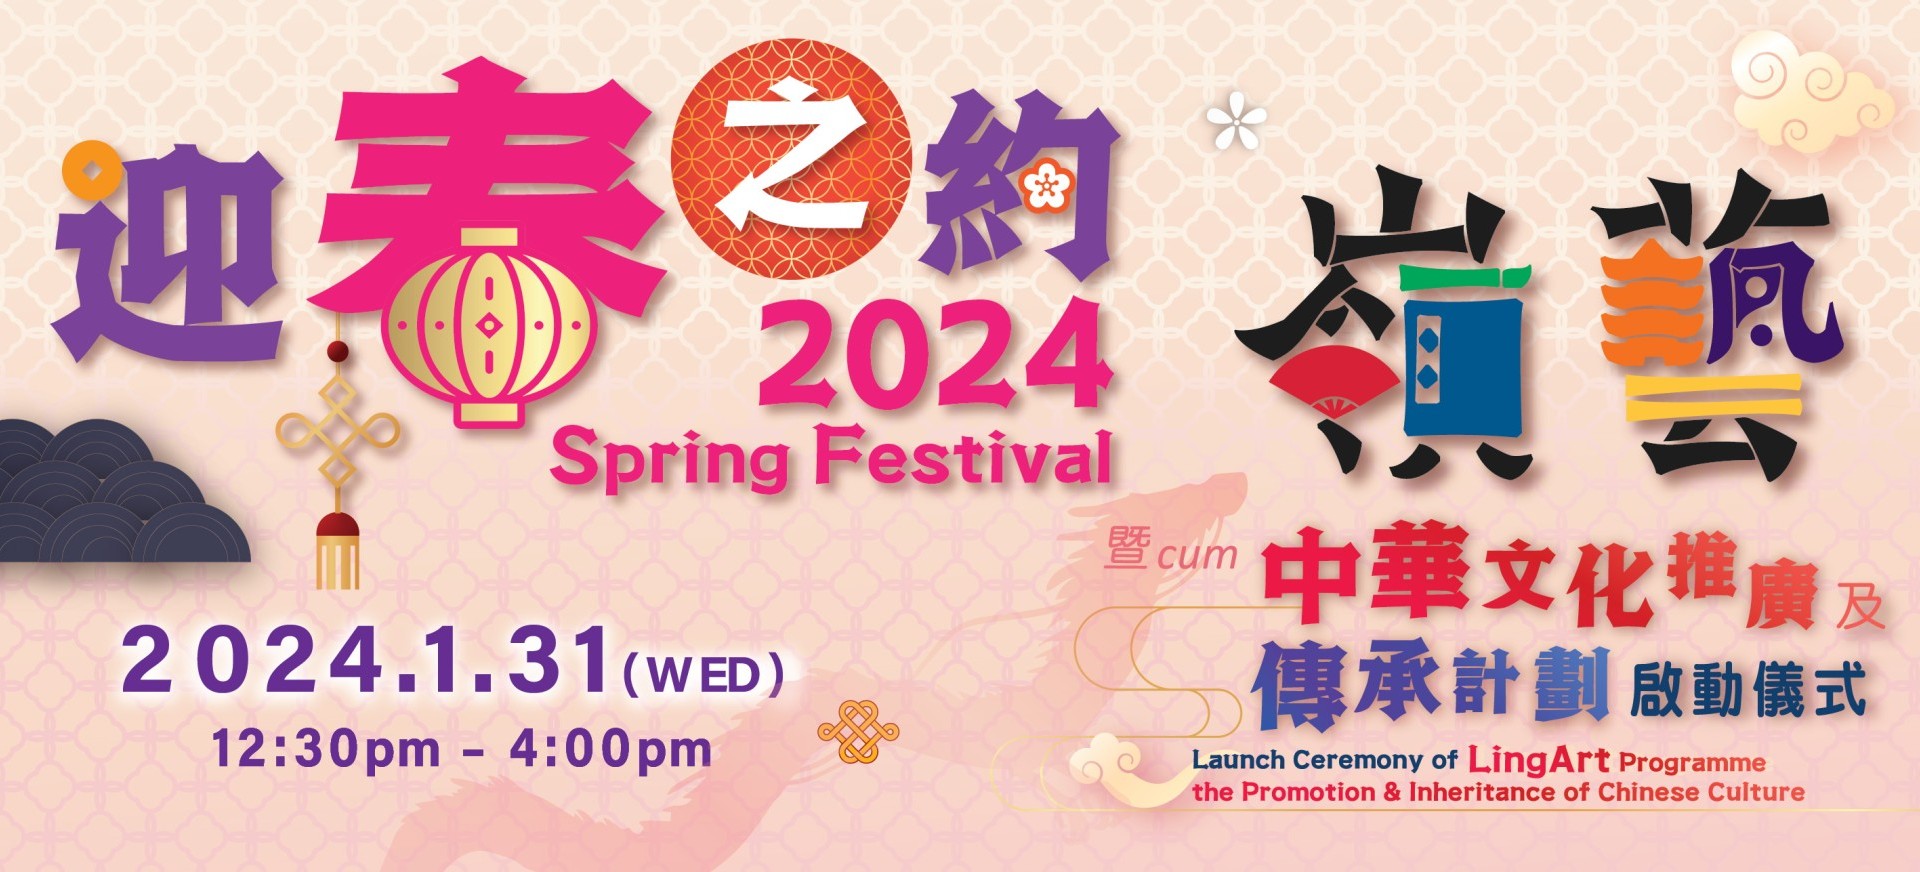 Spring Festival 2024 cum Launch Ceremony of LingArt Programme on the Promotion and Inheritance of Chinese Culture